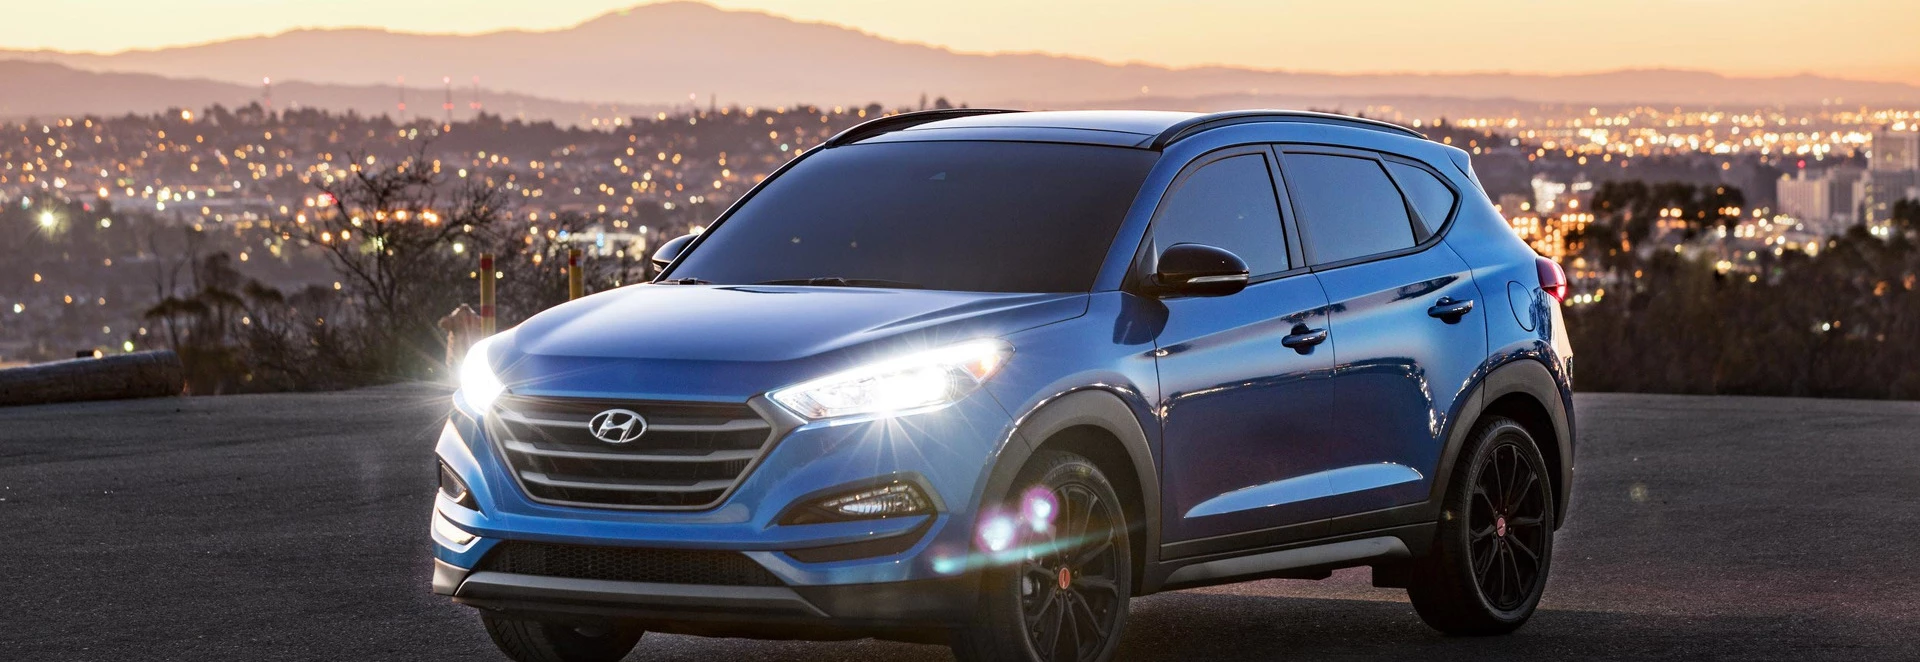 The next Hyundai to get a high-performance N model could be the Tucson